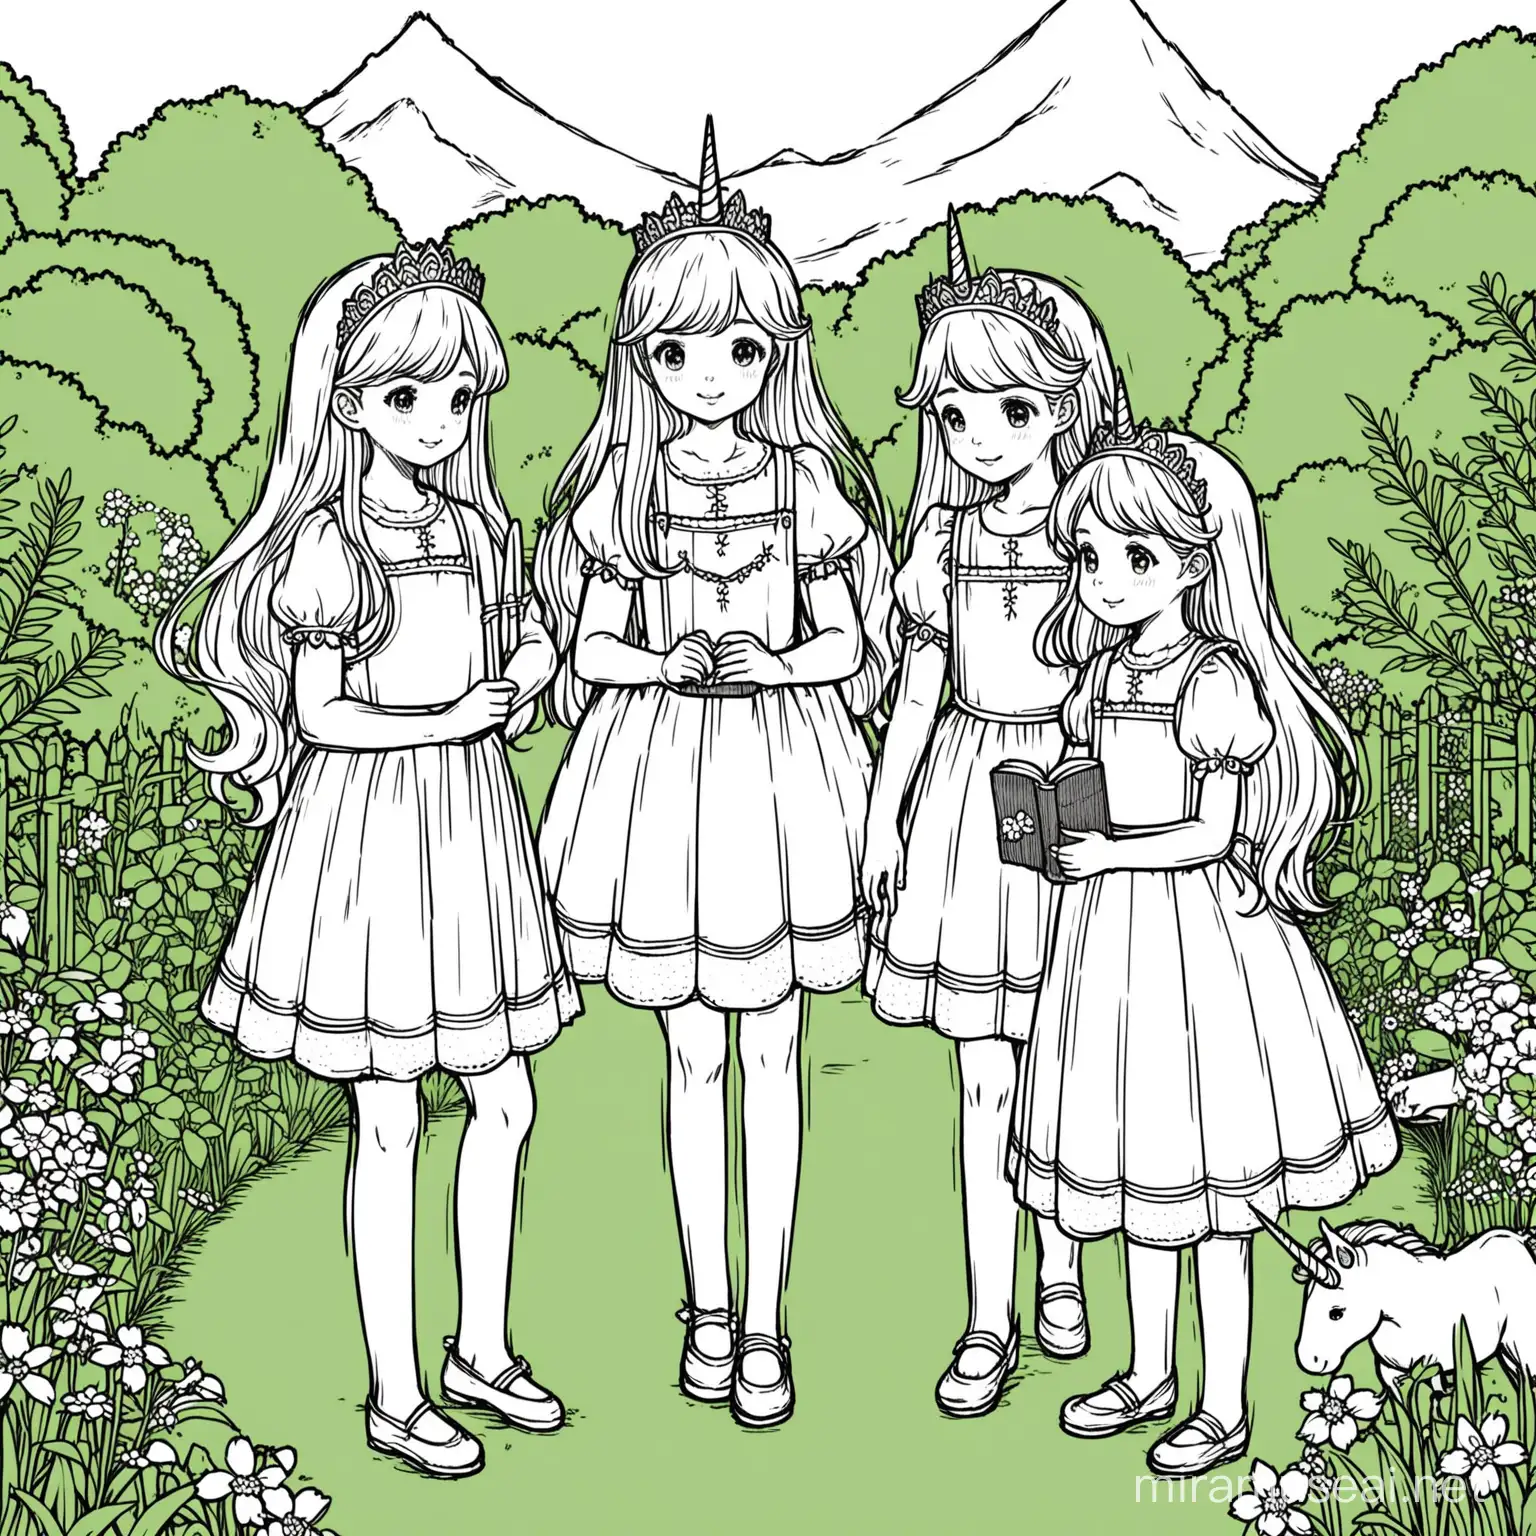 Three Little Princess Girls and Unicorn in Enchanting Garden Coloring Drawing